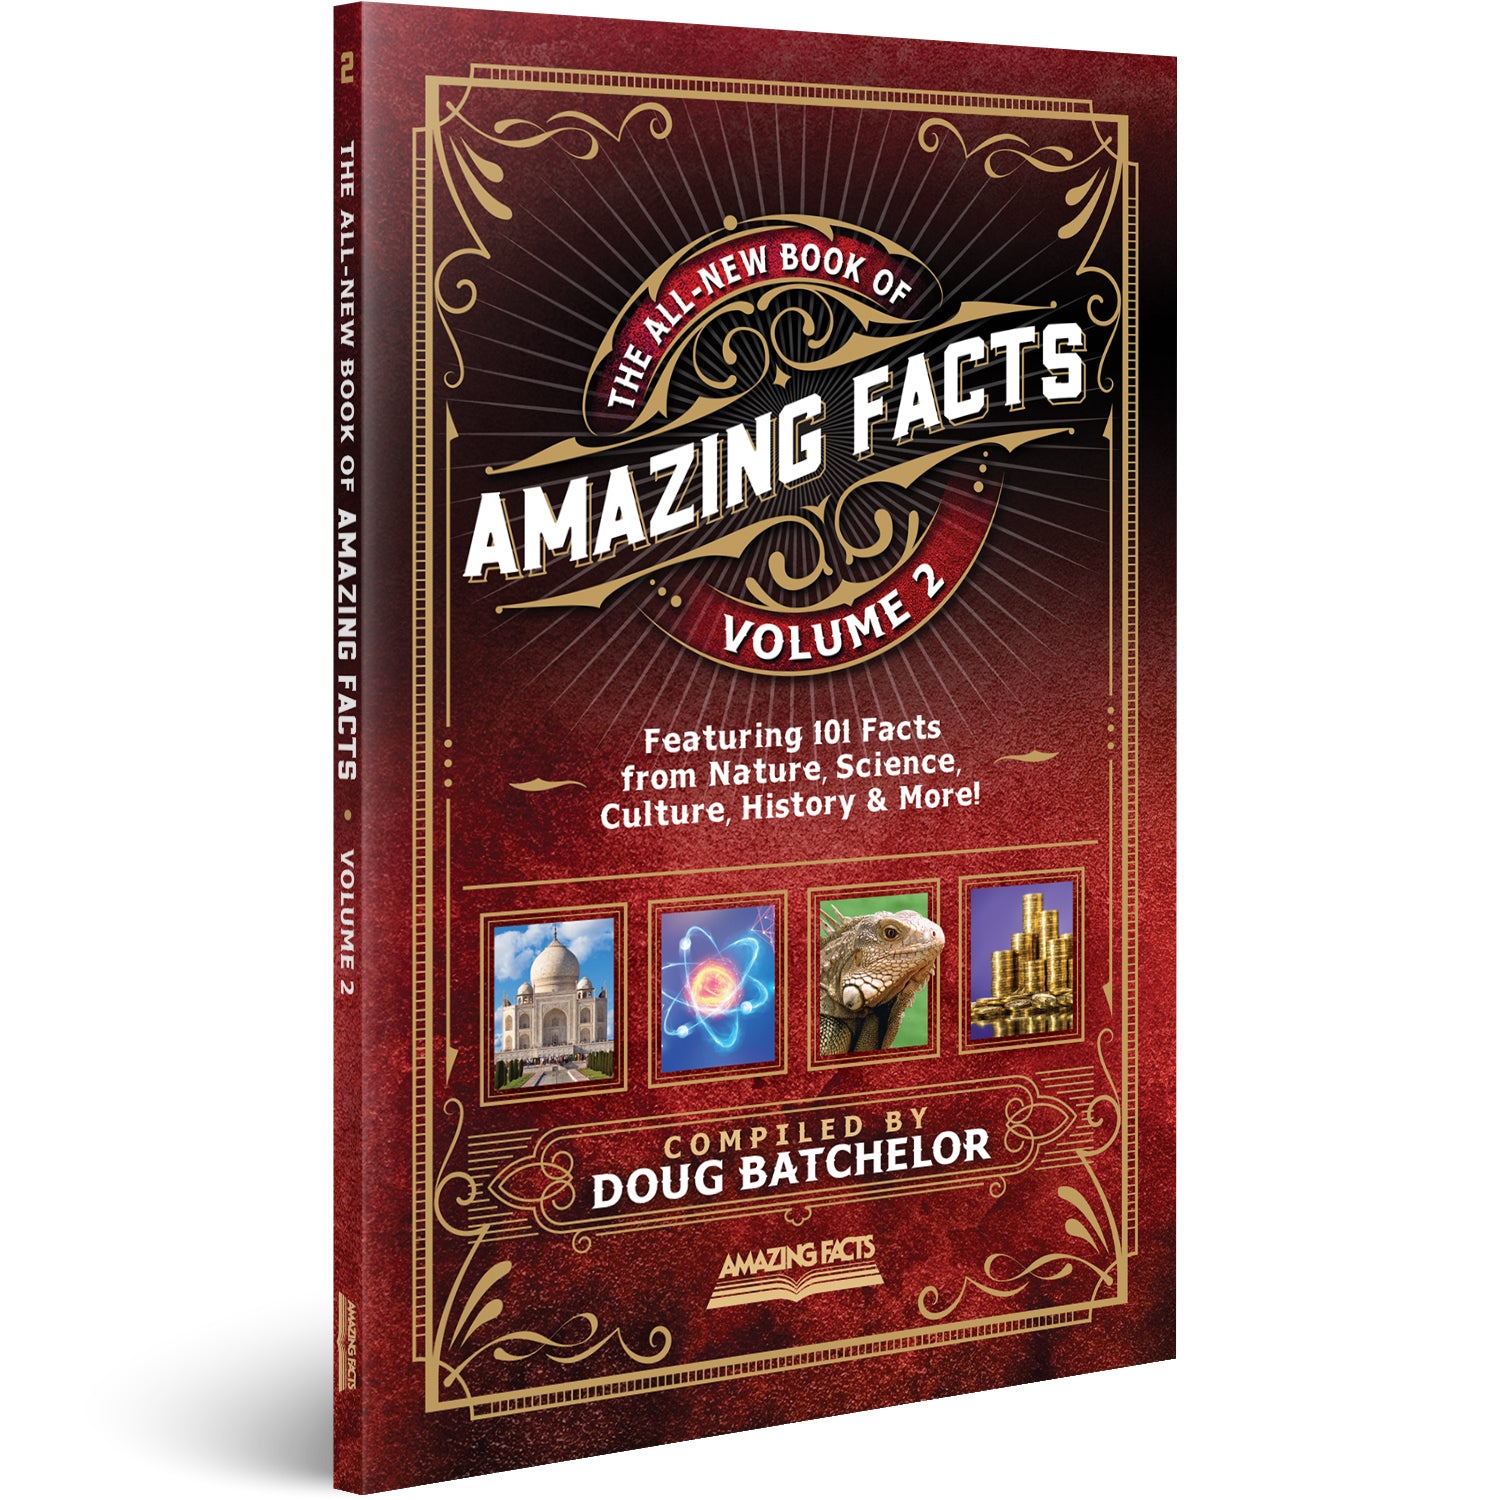 The All-New Book of Amazing Facts Vol 2 by Doug Batchelor